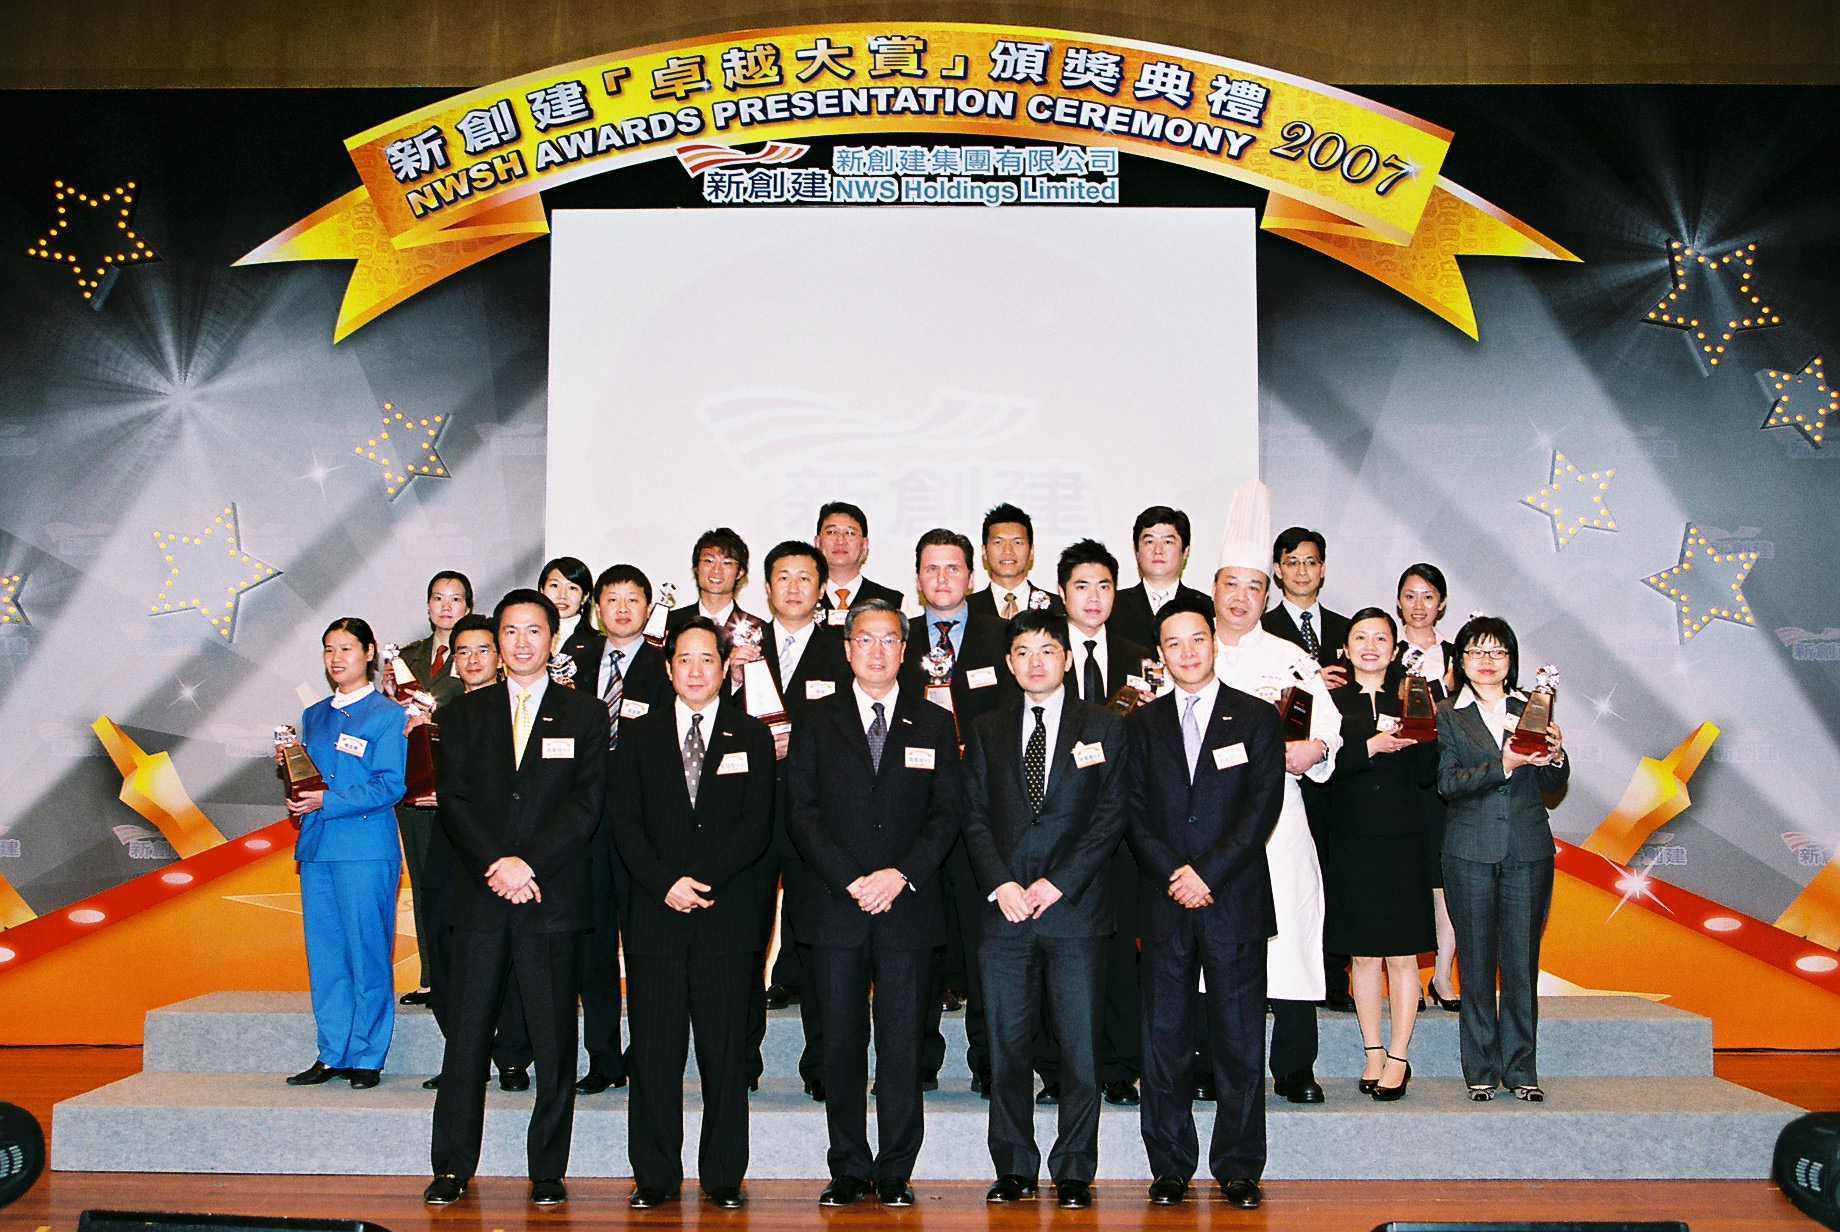 Recognizing outstanding performance in <BR> NWS Holdings Awards Presentation Ceremony 2007